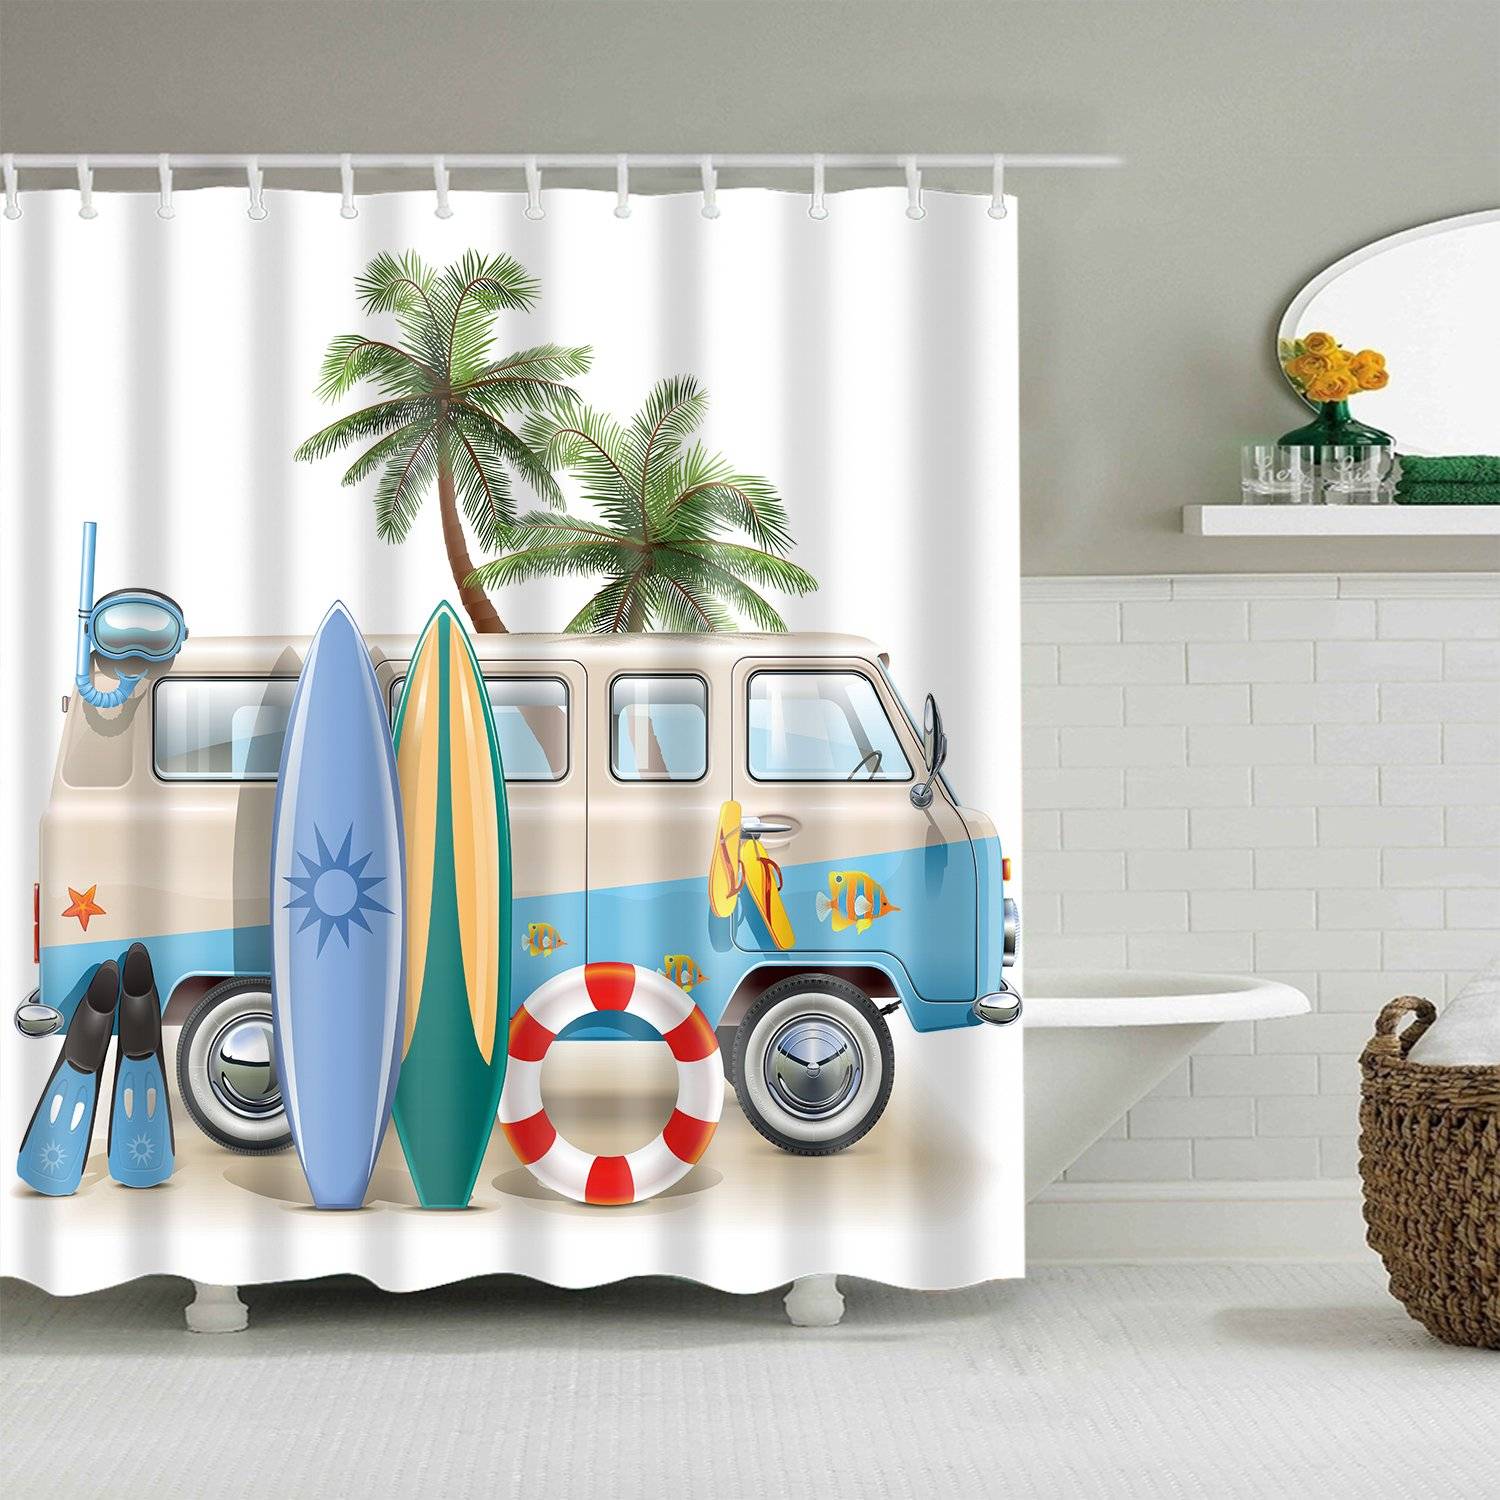 Diving Snorkeling Surfing Gear with Bus Surf Summer Vacation Shower Curtain